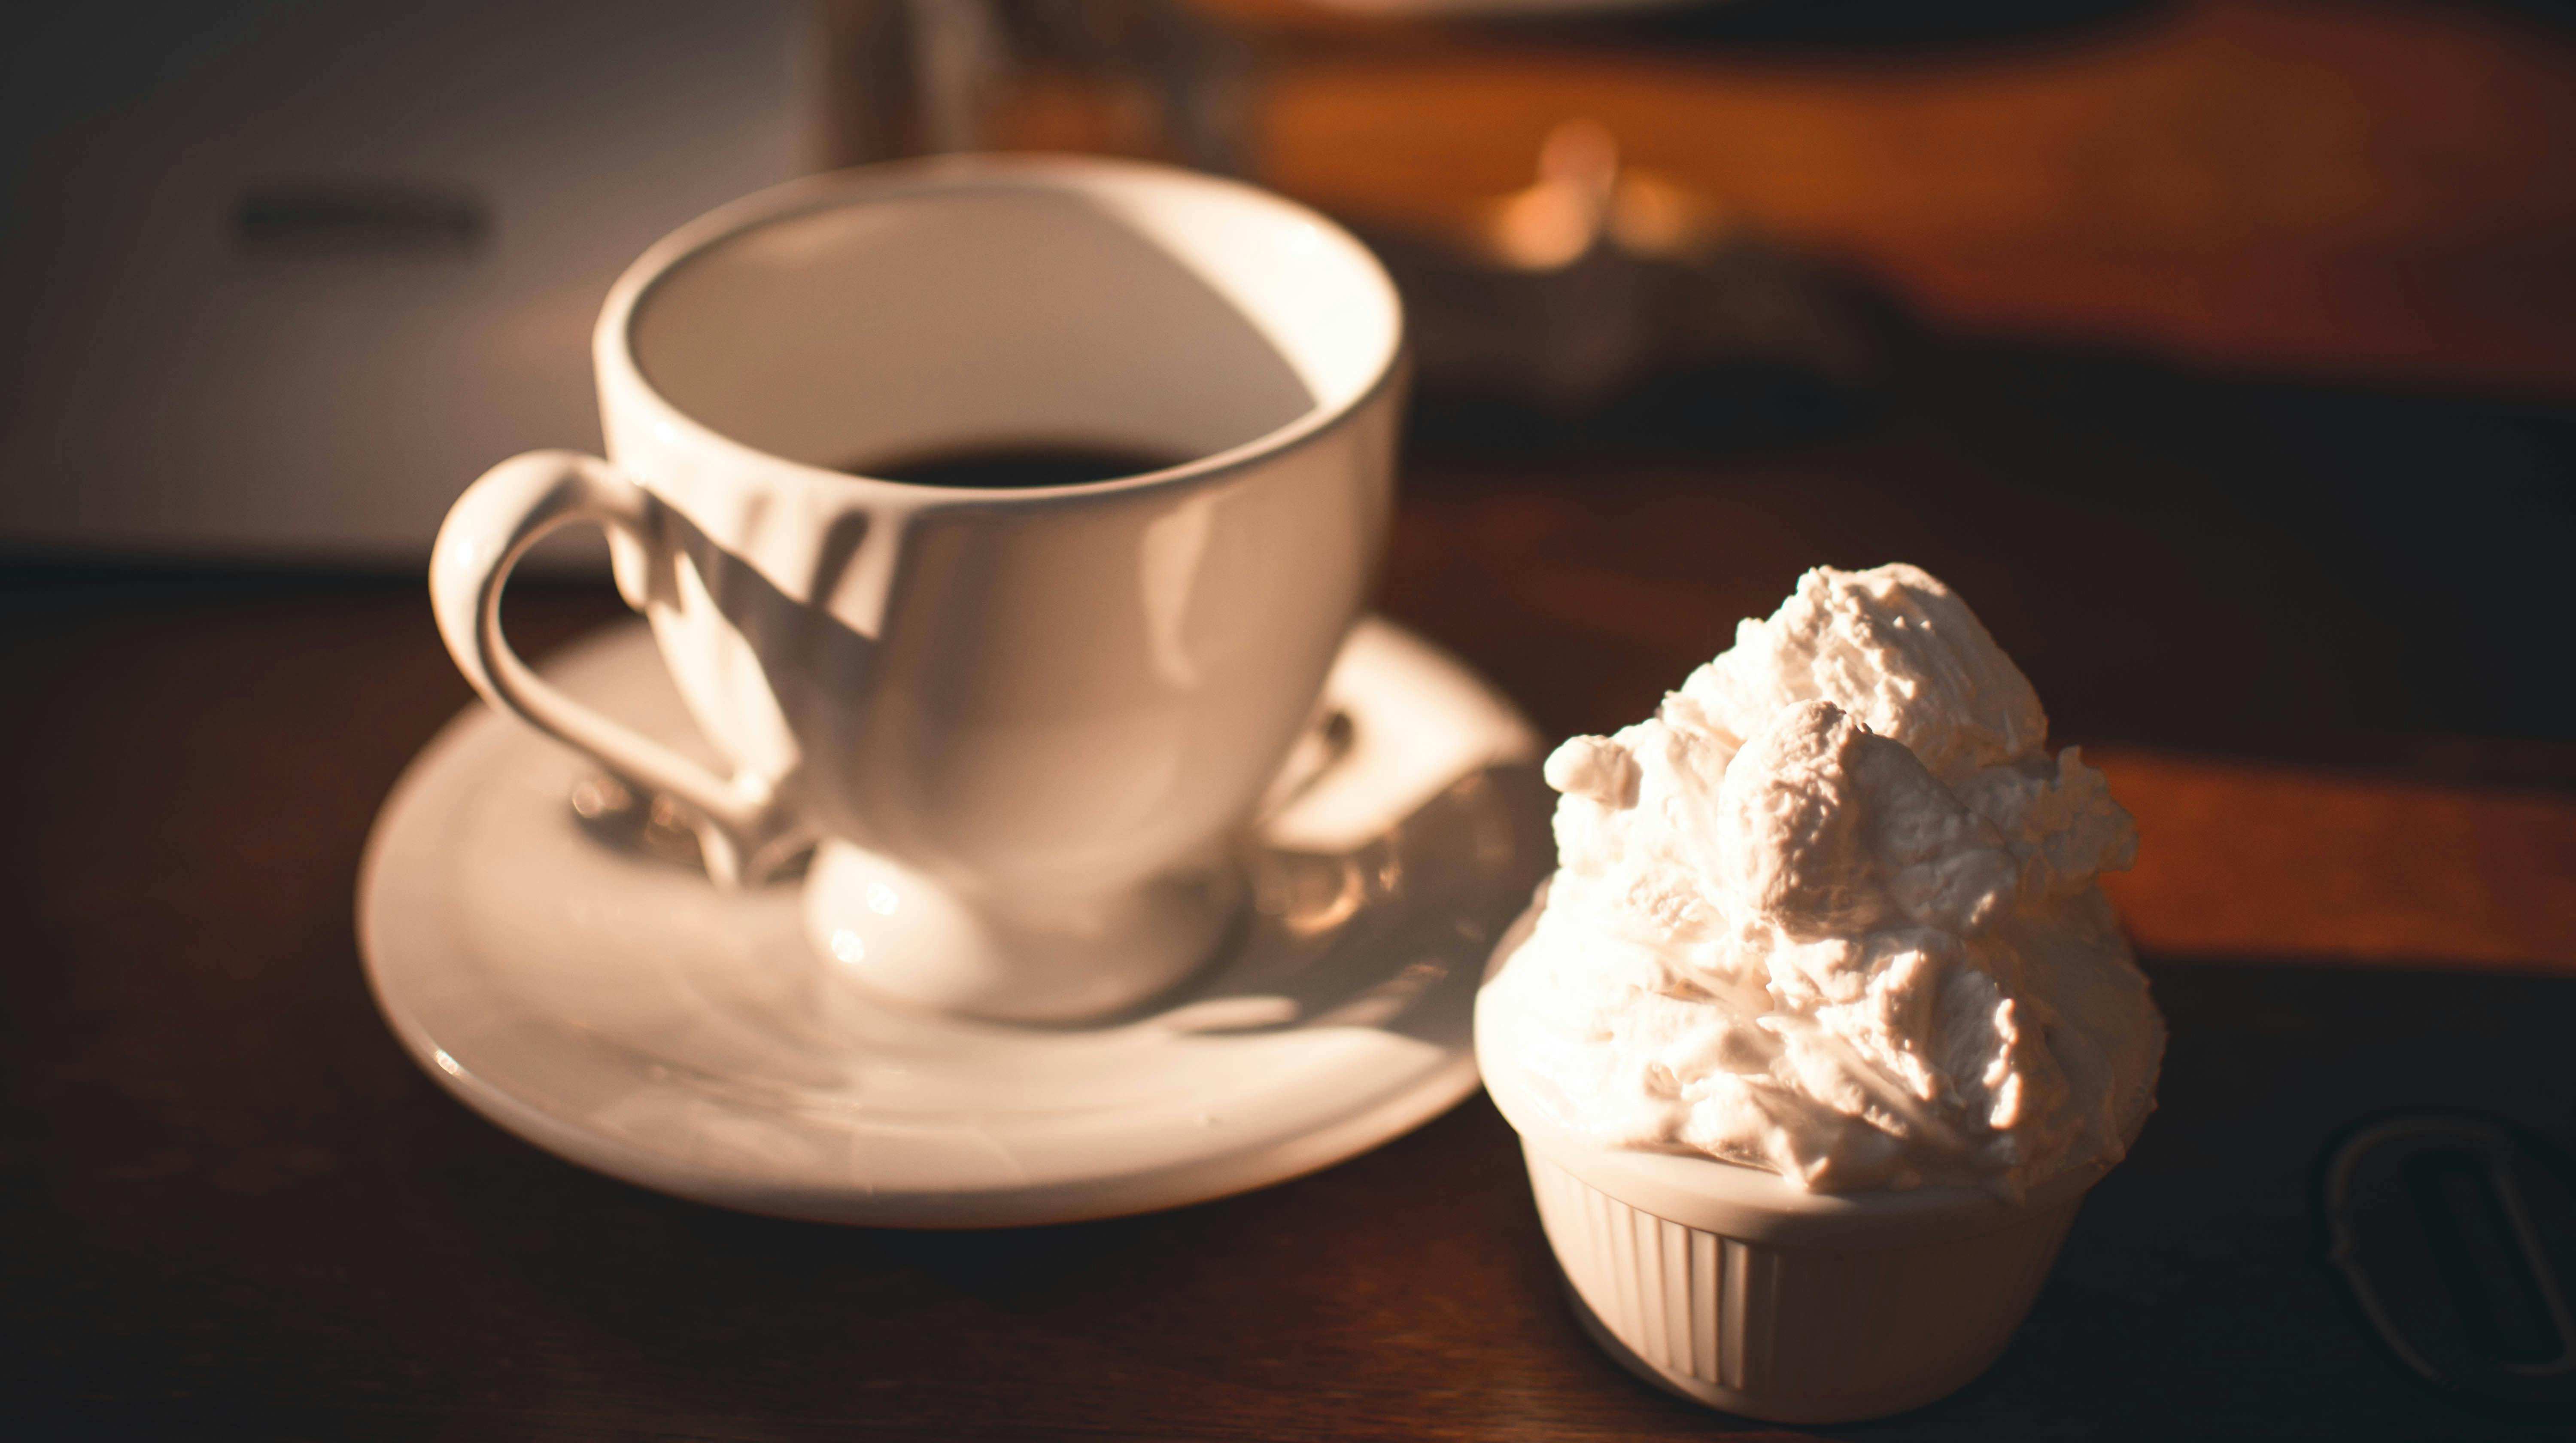 A single shot of espresso served in a demitasse glass with a dollop of fresh Chantilly cream served in a ramekin